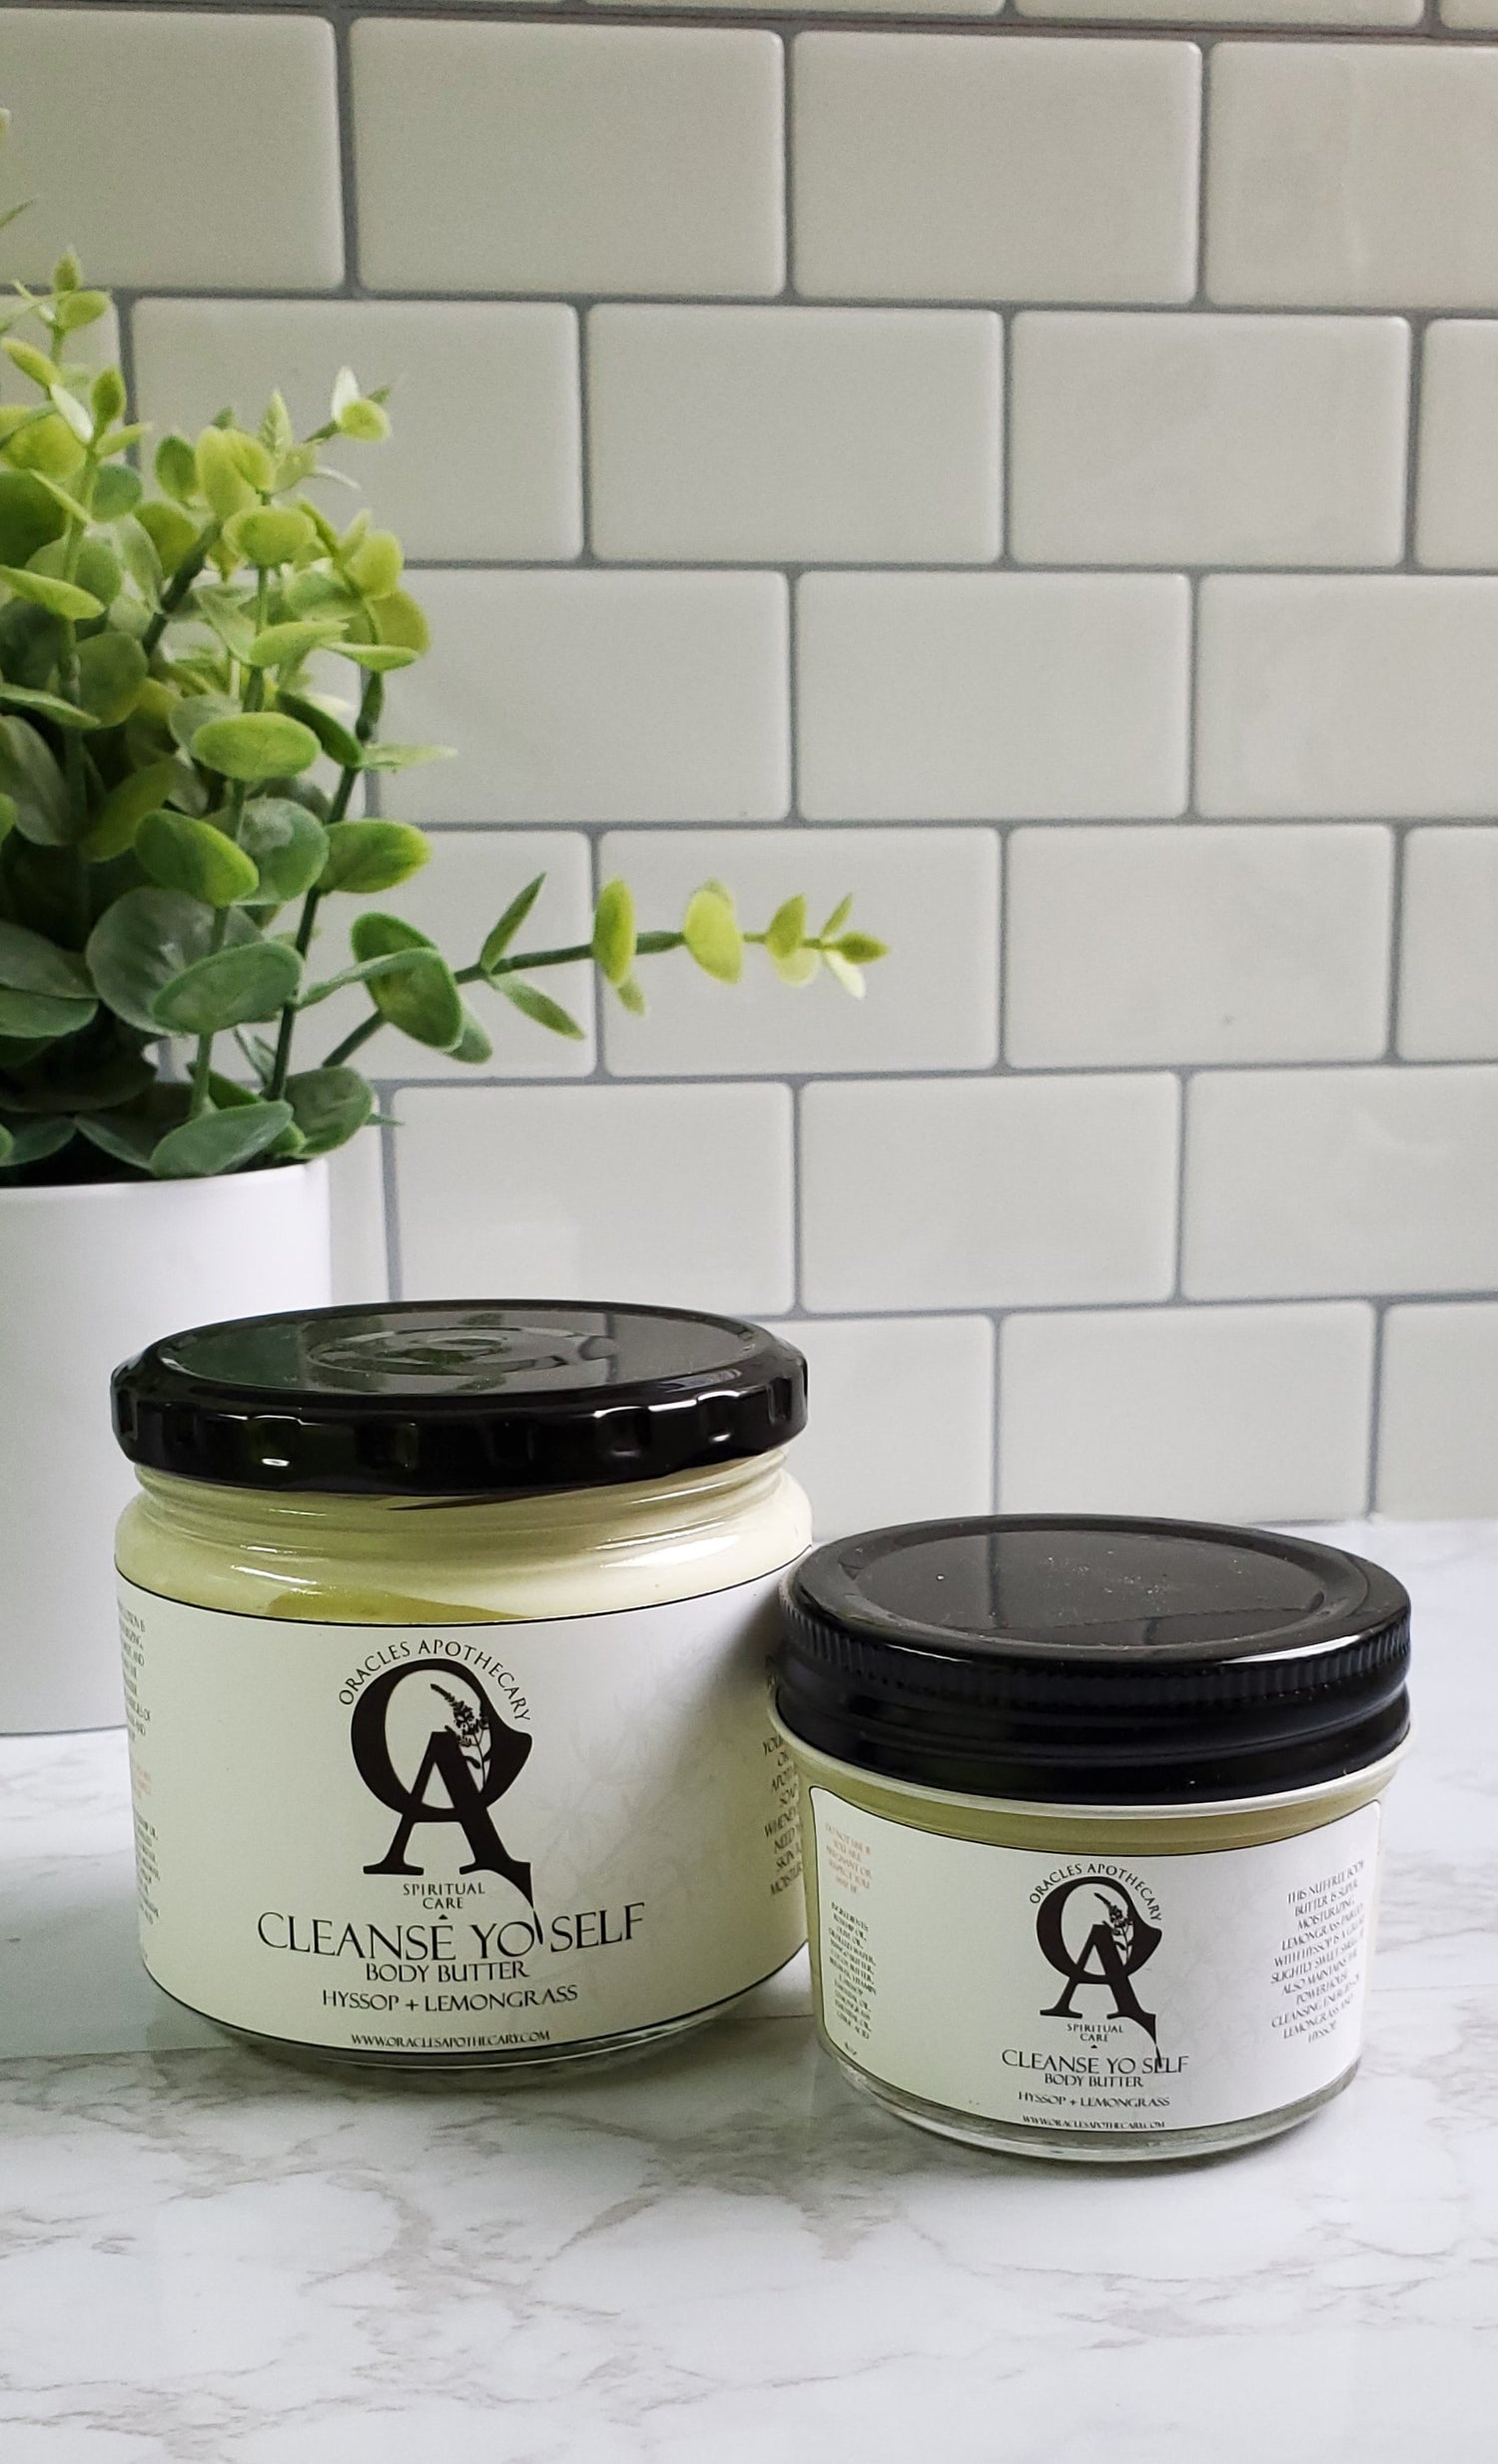 two glass jars of body butter 4 oz and 8 oz